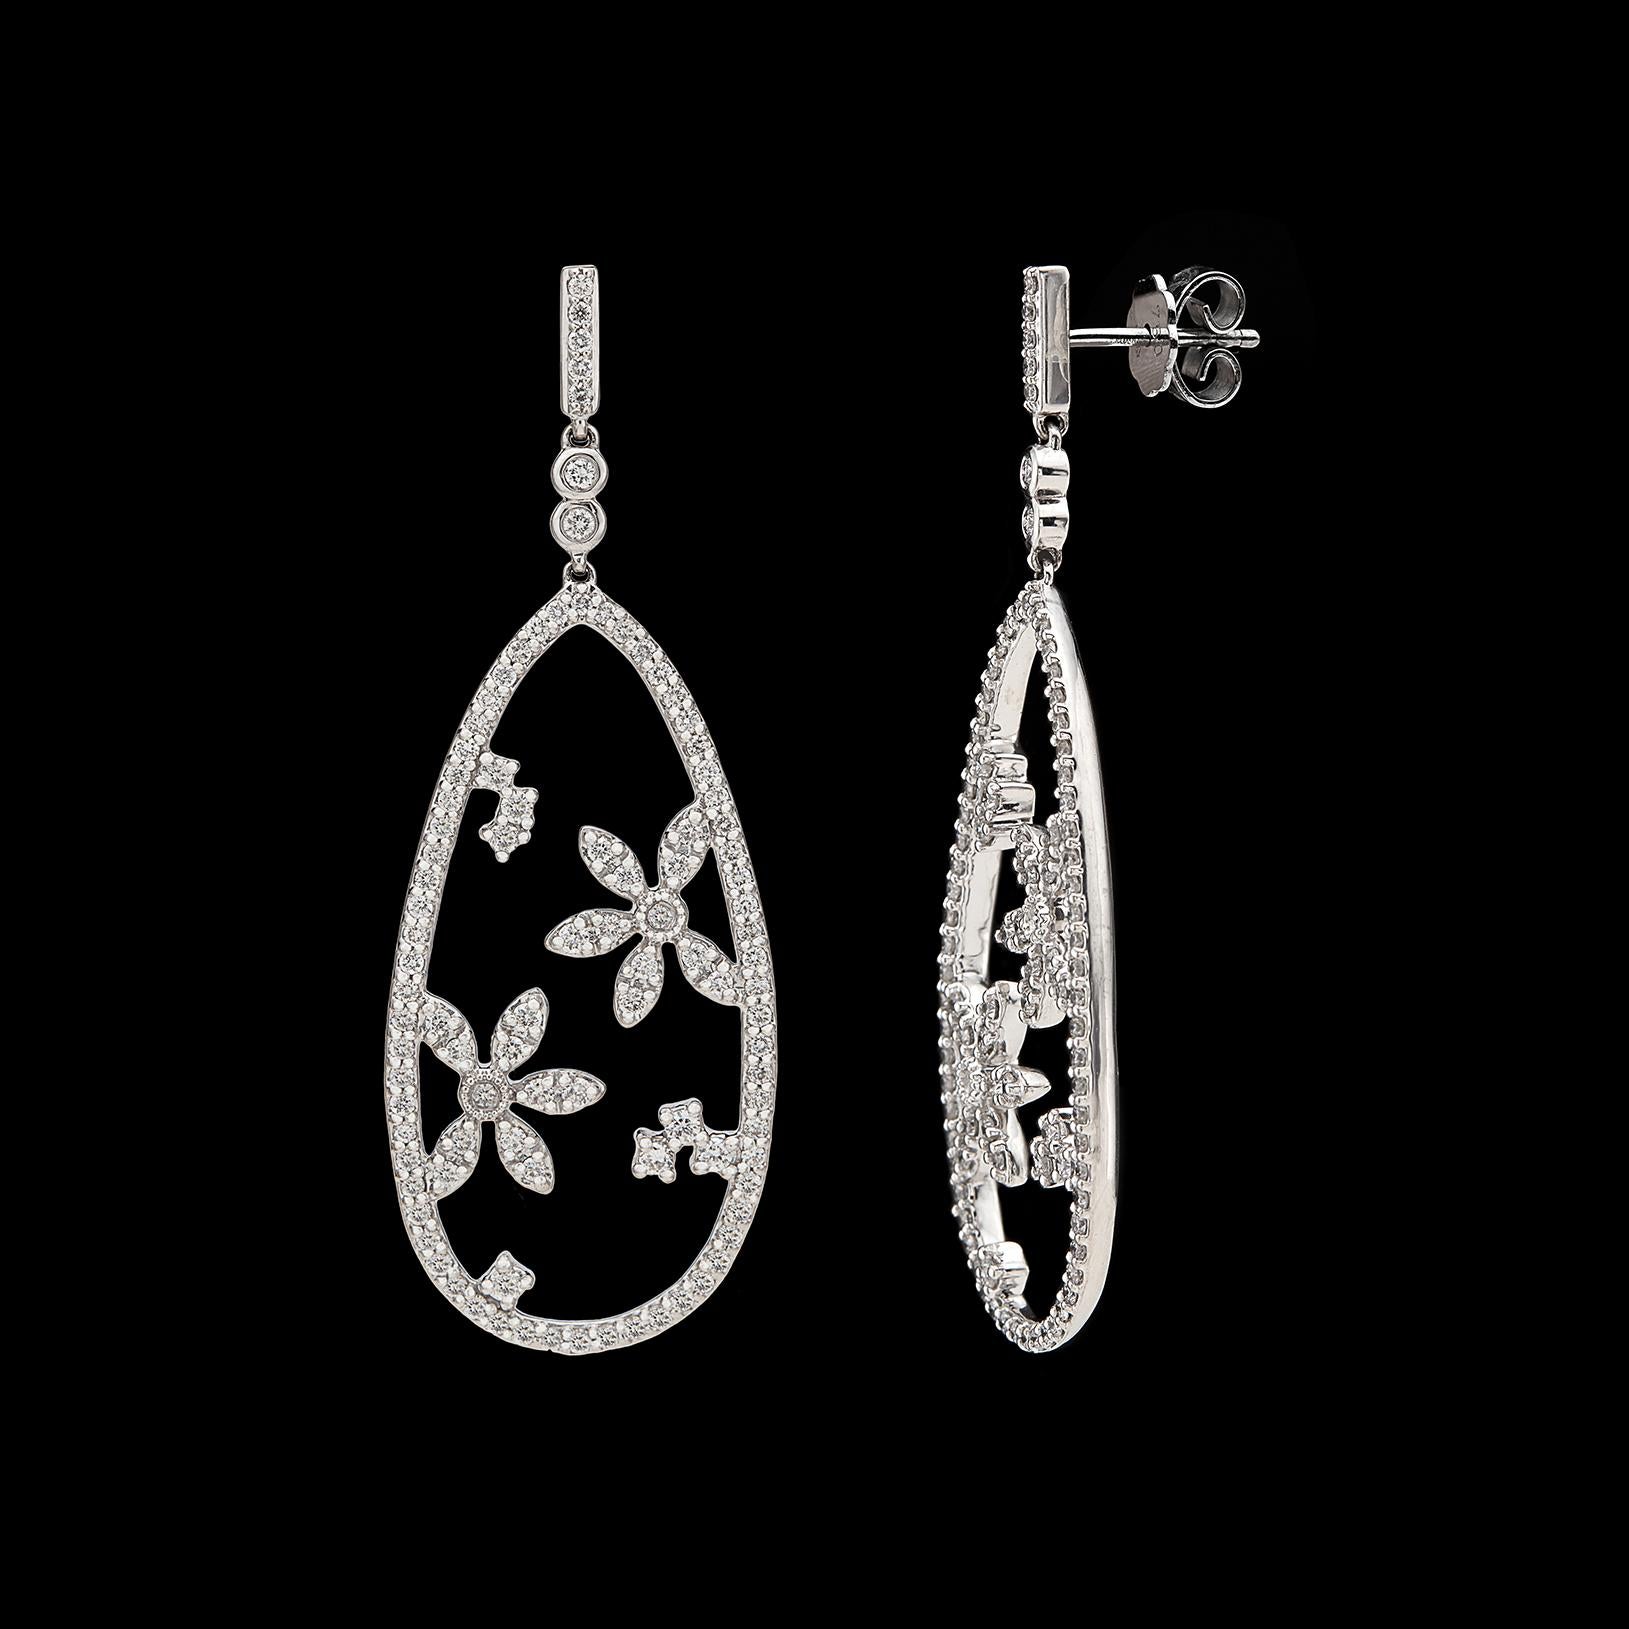 Romantic and fun, these diamond and 18k white gold drop earrings by Hans Kreiger are the perfect gift! The teardrop-shaped pendant earrings with floral accents are pave-set with 198 round brilliant-cut diamonds totaling 1.52 carats, G/VS quality.